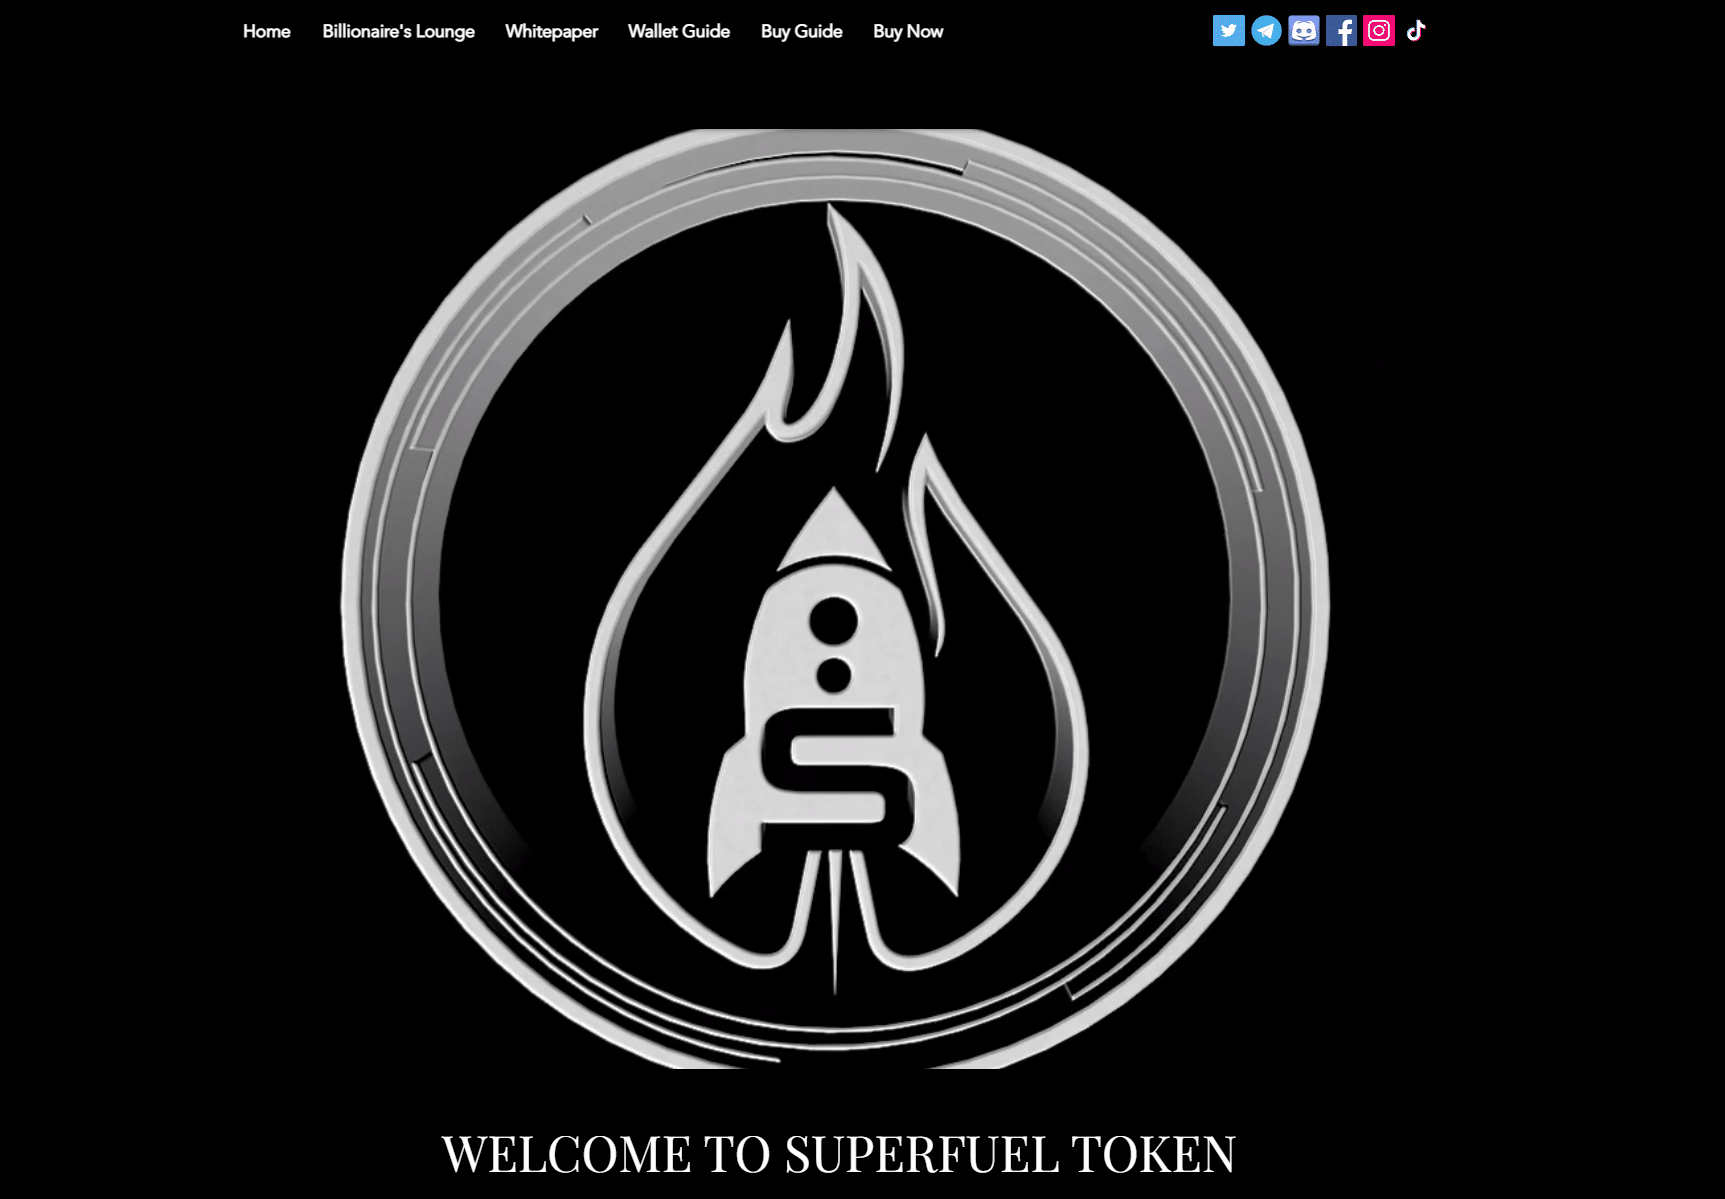 The SuperFuel start page